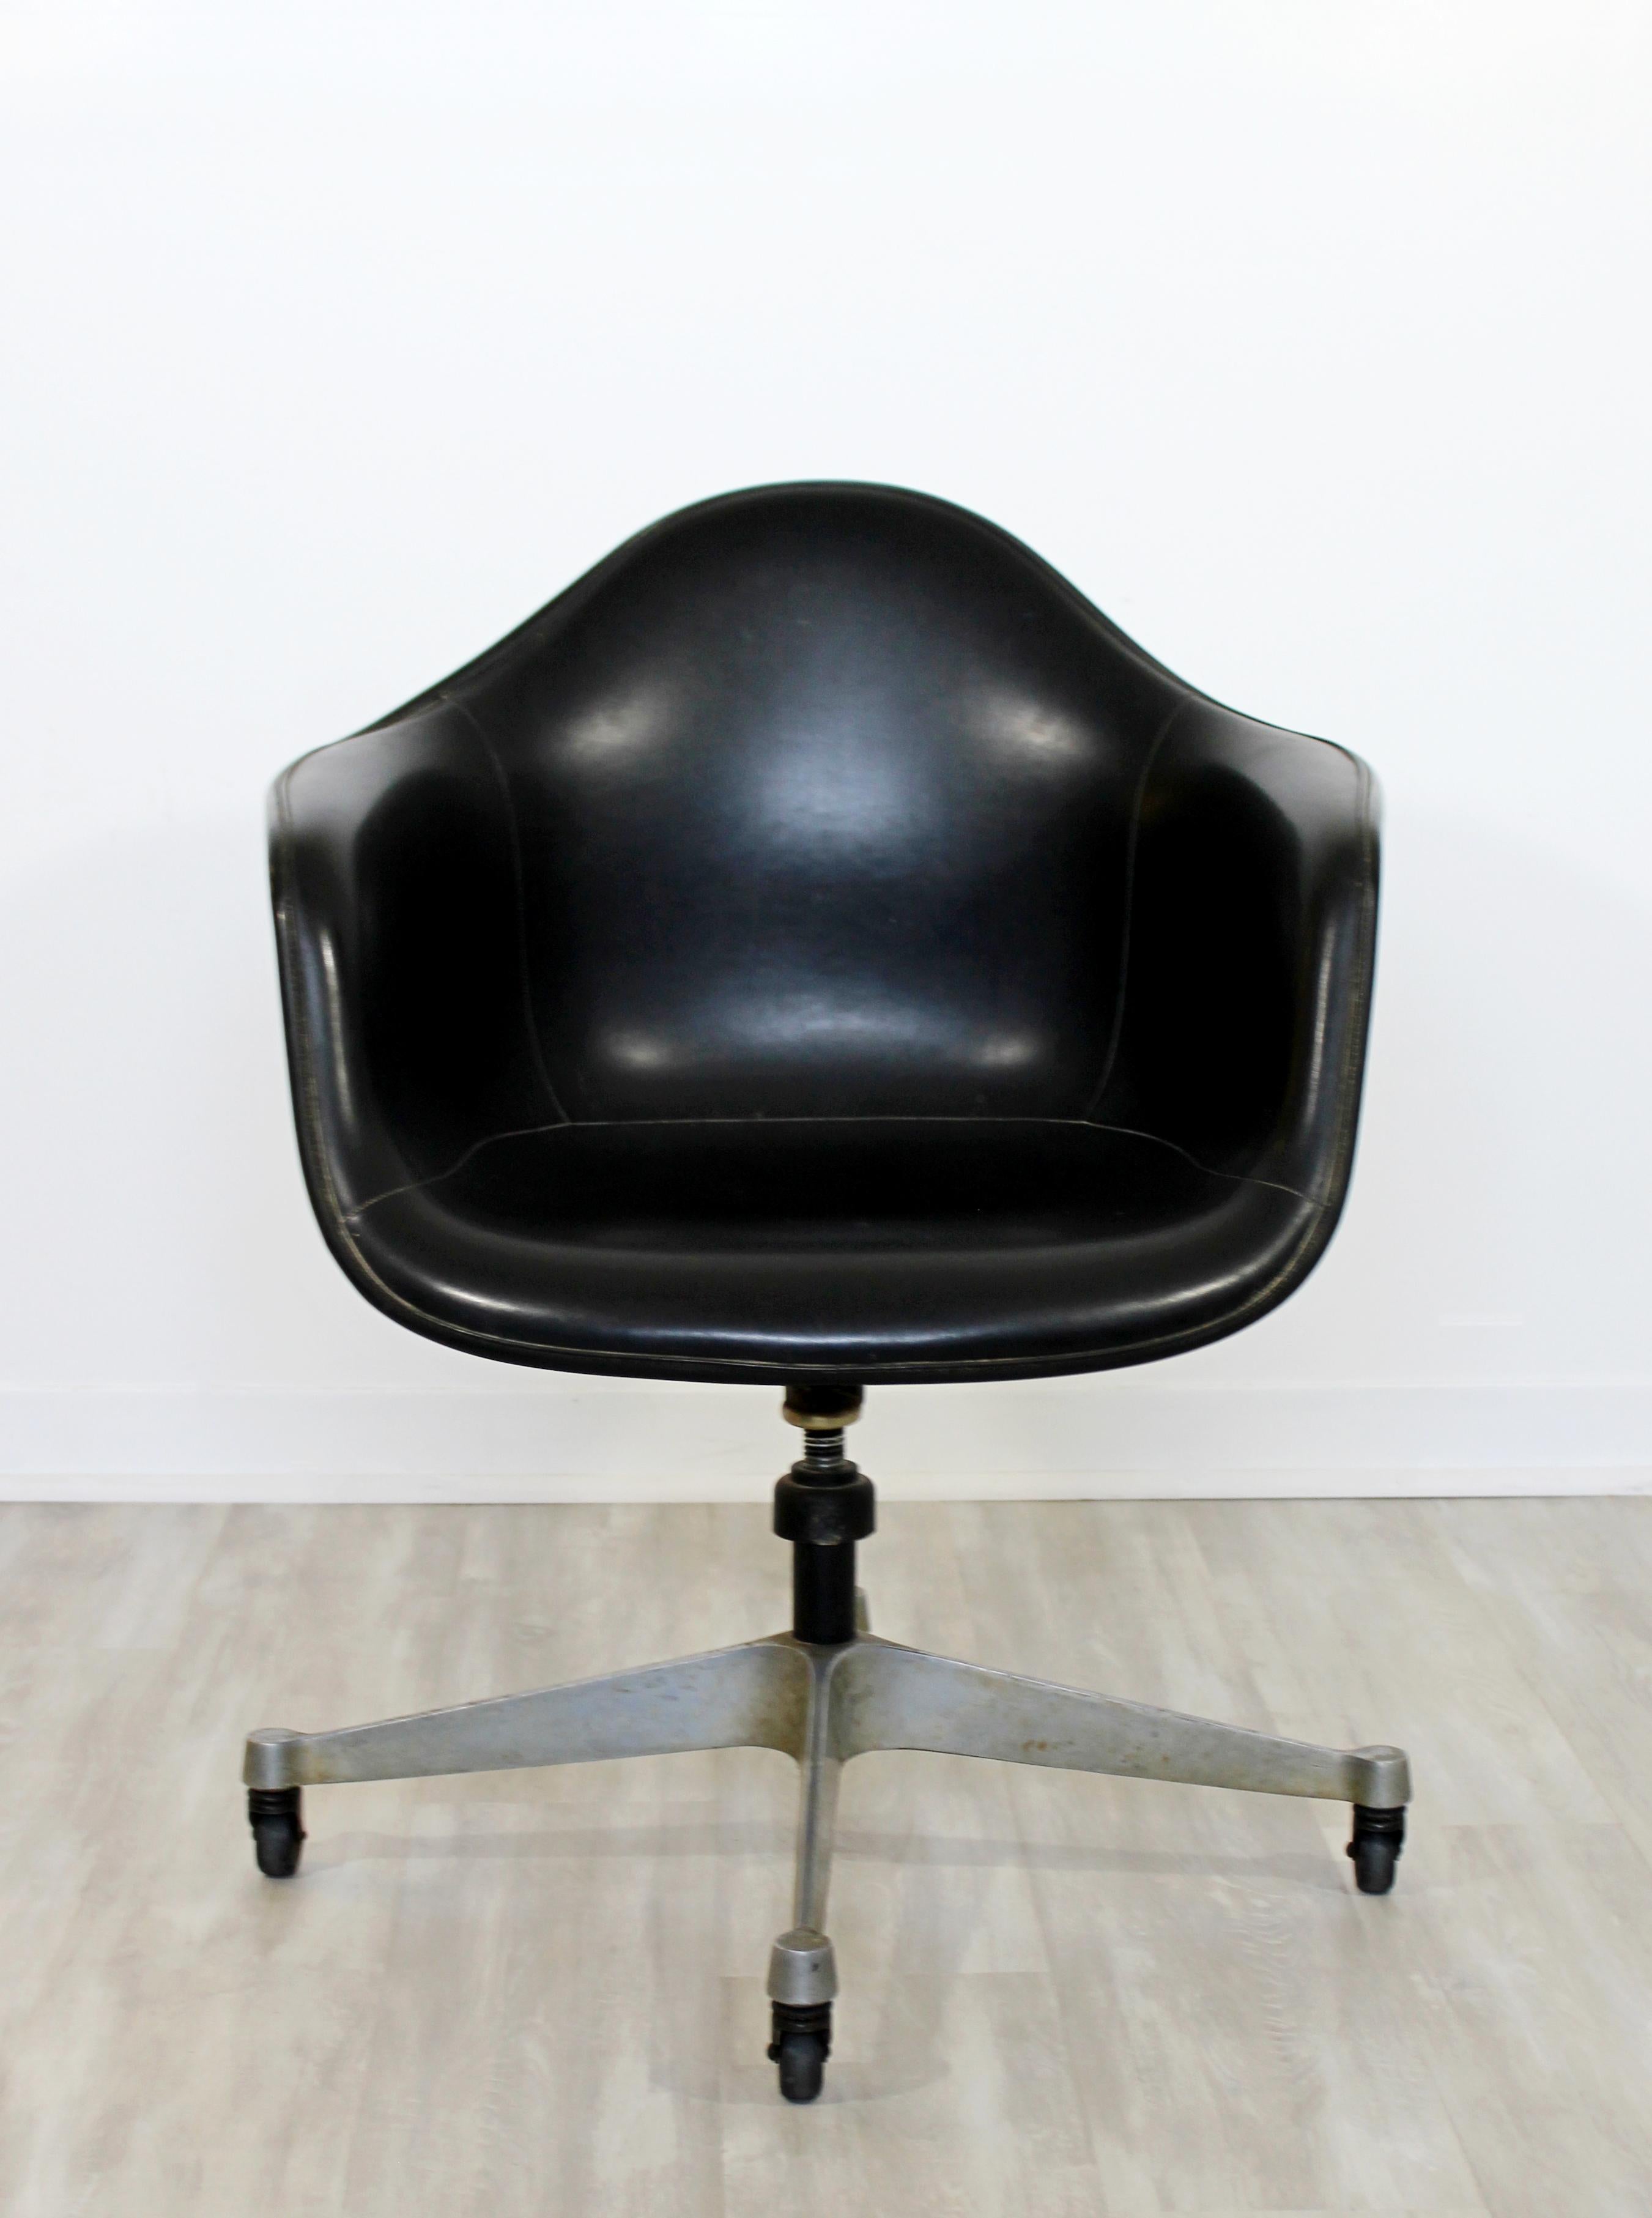 For your consideration is an original, fiberglass shell, swivel armchair, by Charles & Ray Eames for Herman Miller, circa the 1960s. Original tag reads 1968. In good vintage condition. The dimensions are 25